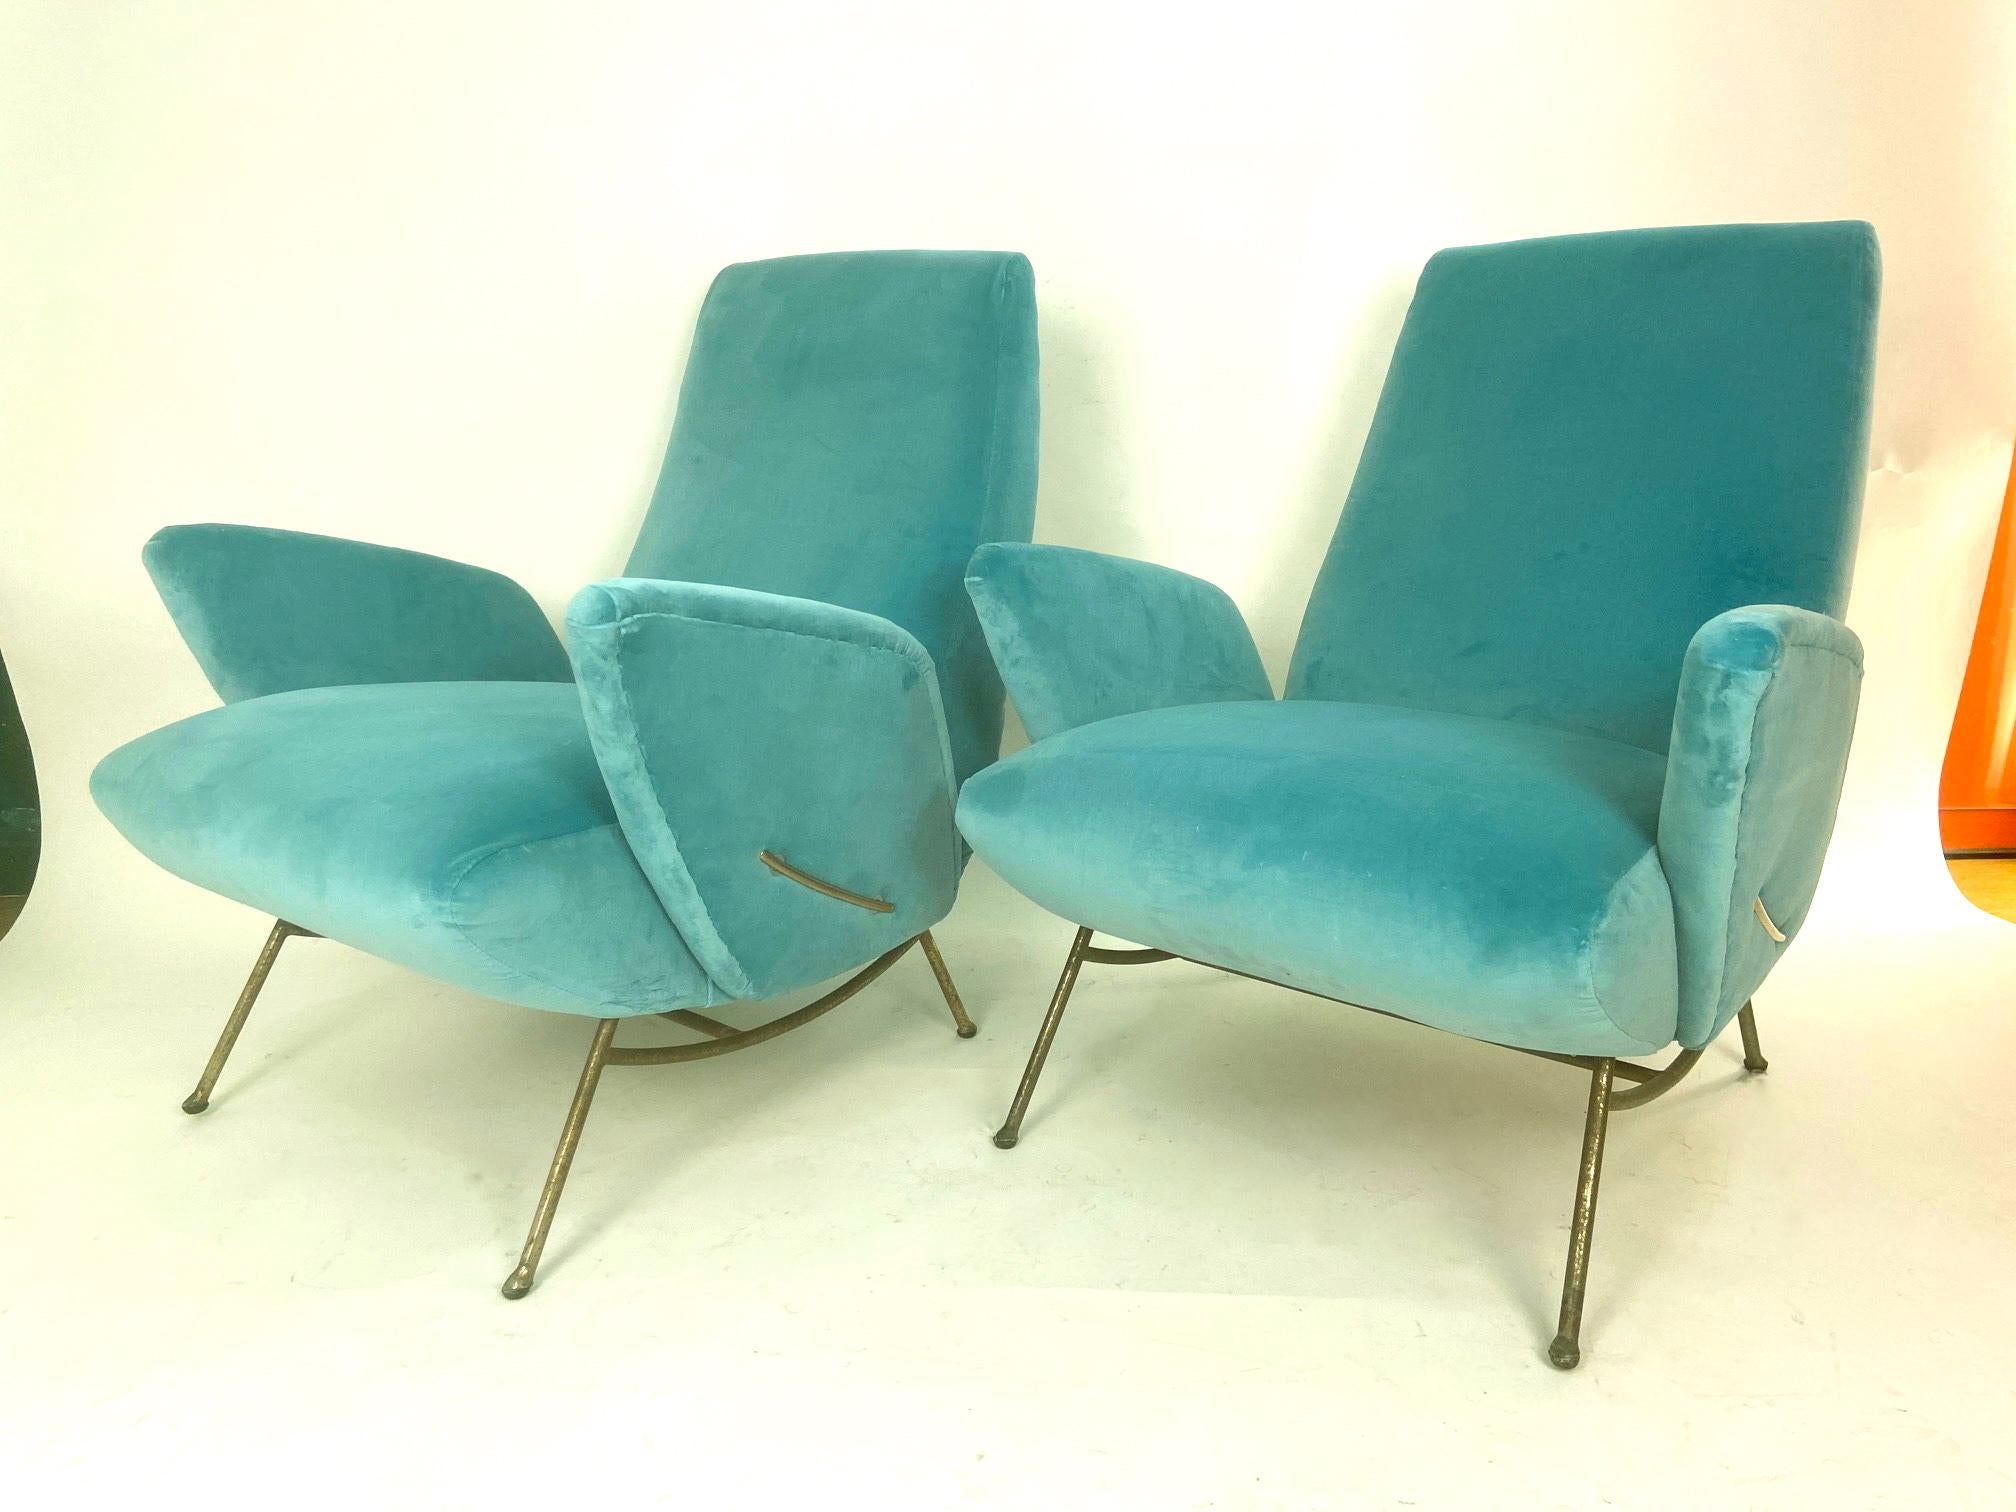 A set of Italian midcentury turquoise blue original armchairs designed by Nino Zoncada. Iron base and brass fittings Reupholstered in turquoise blue velvet. Extremely comfortable and beautiful.